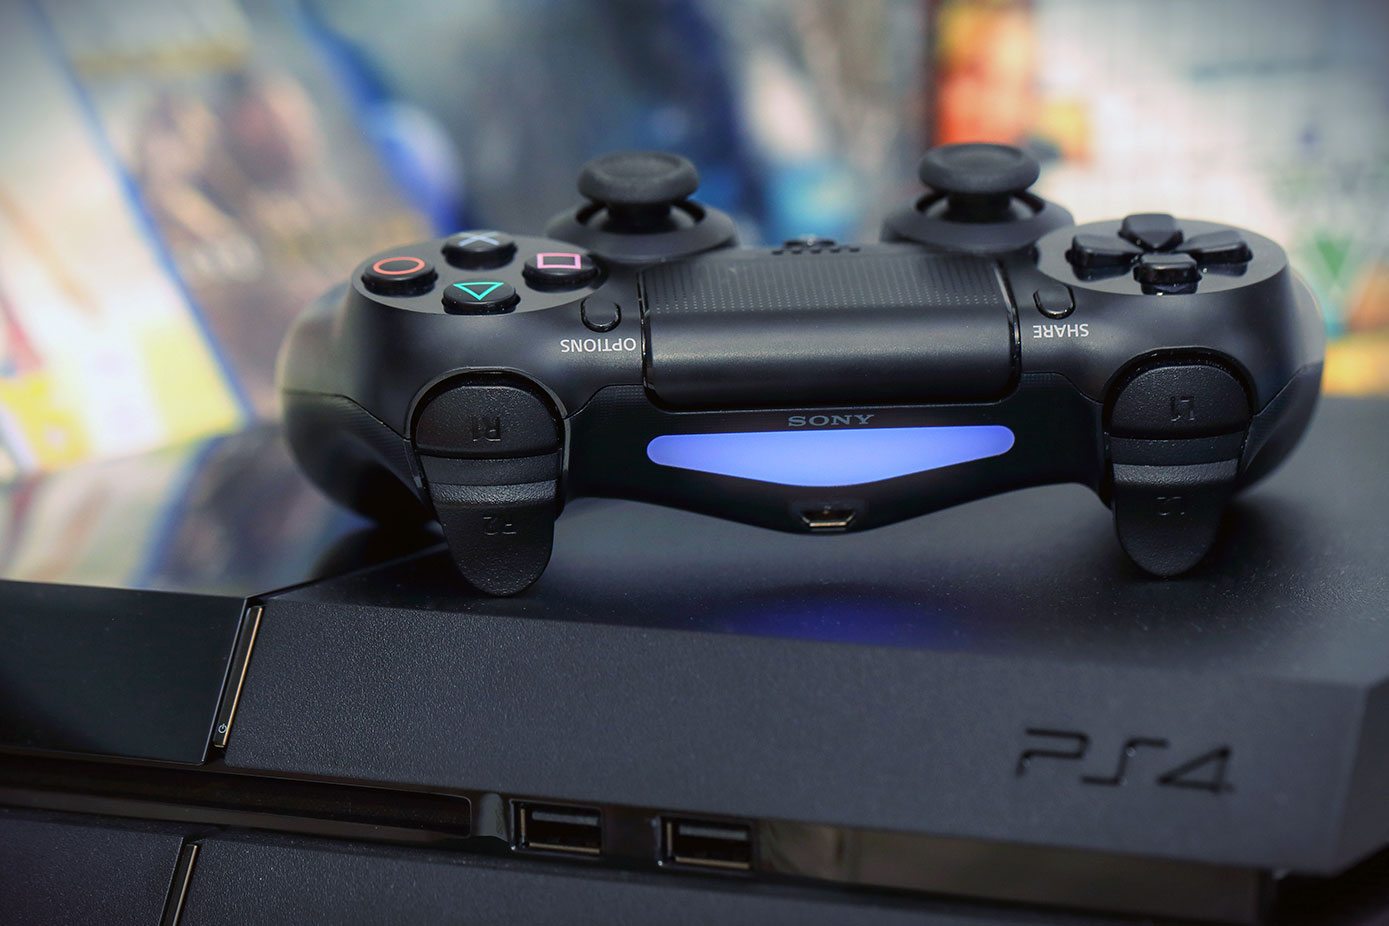 PS4 Terms Of Service Causing PS4 Network Down Issues - PlayStation